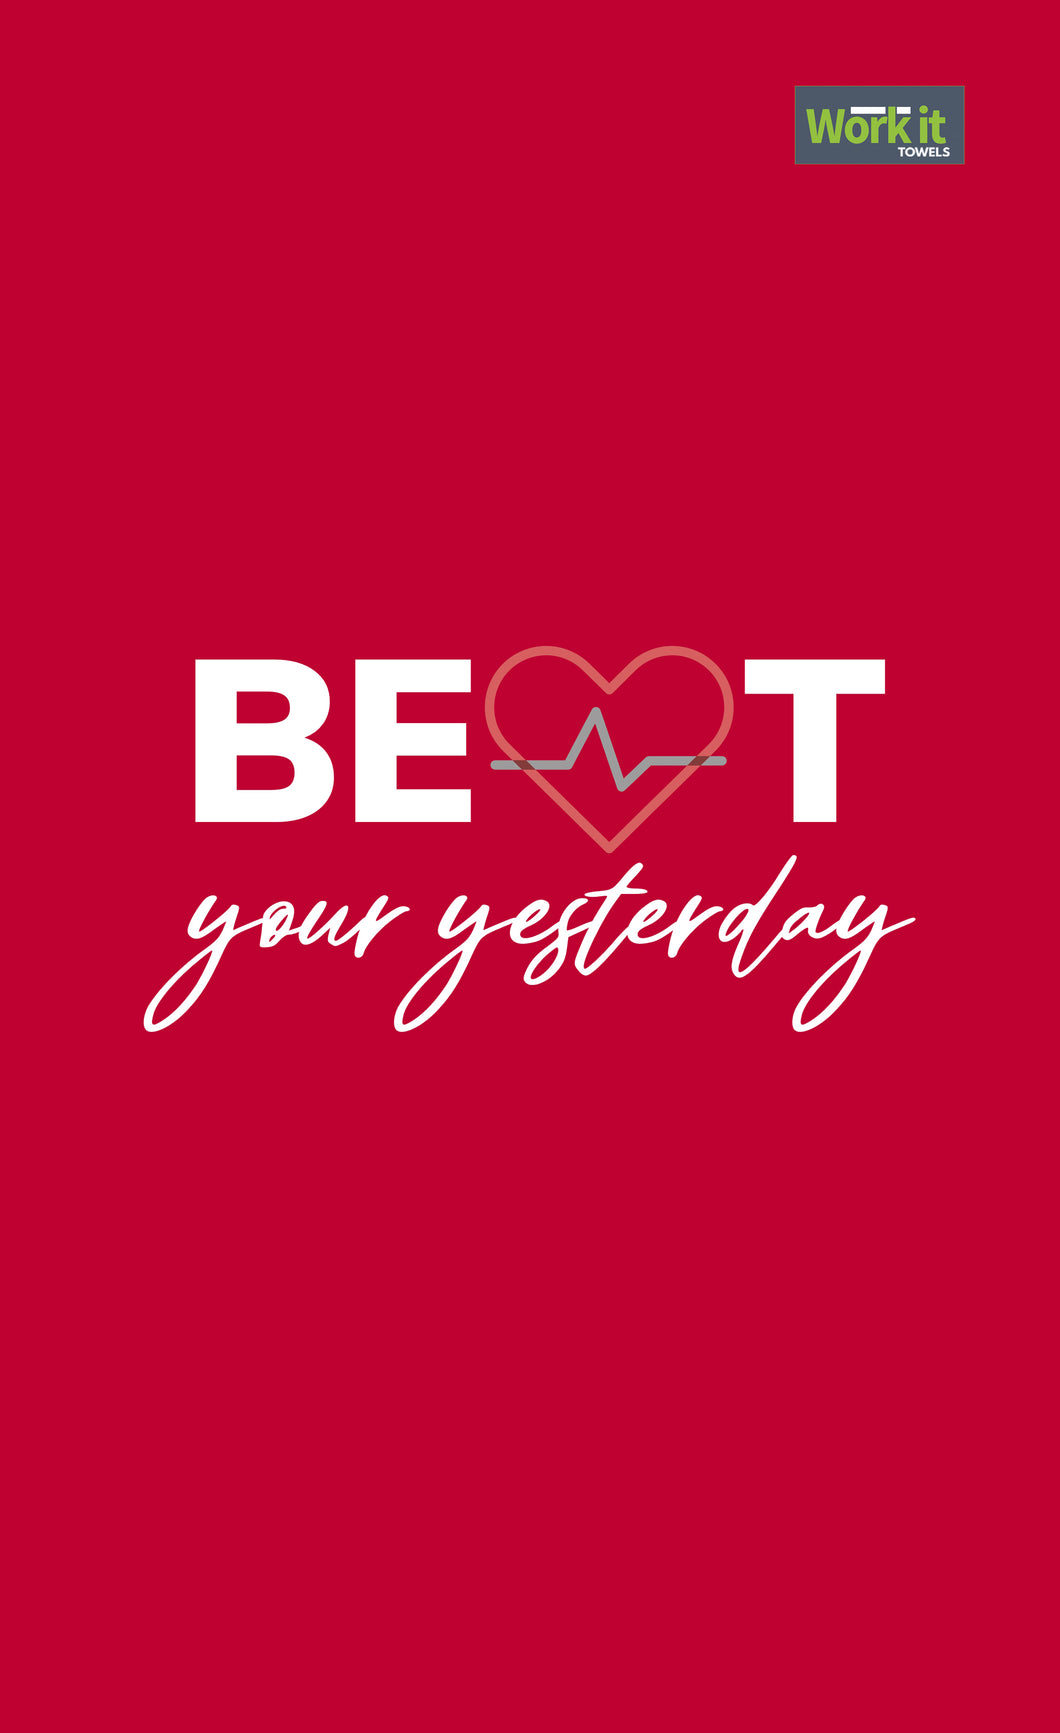 Beat Your Yesterday - work it towels